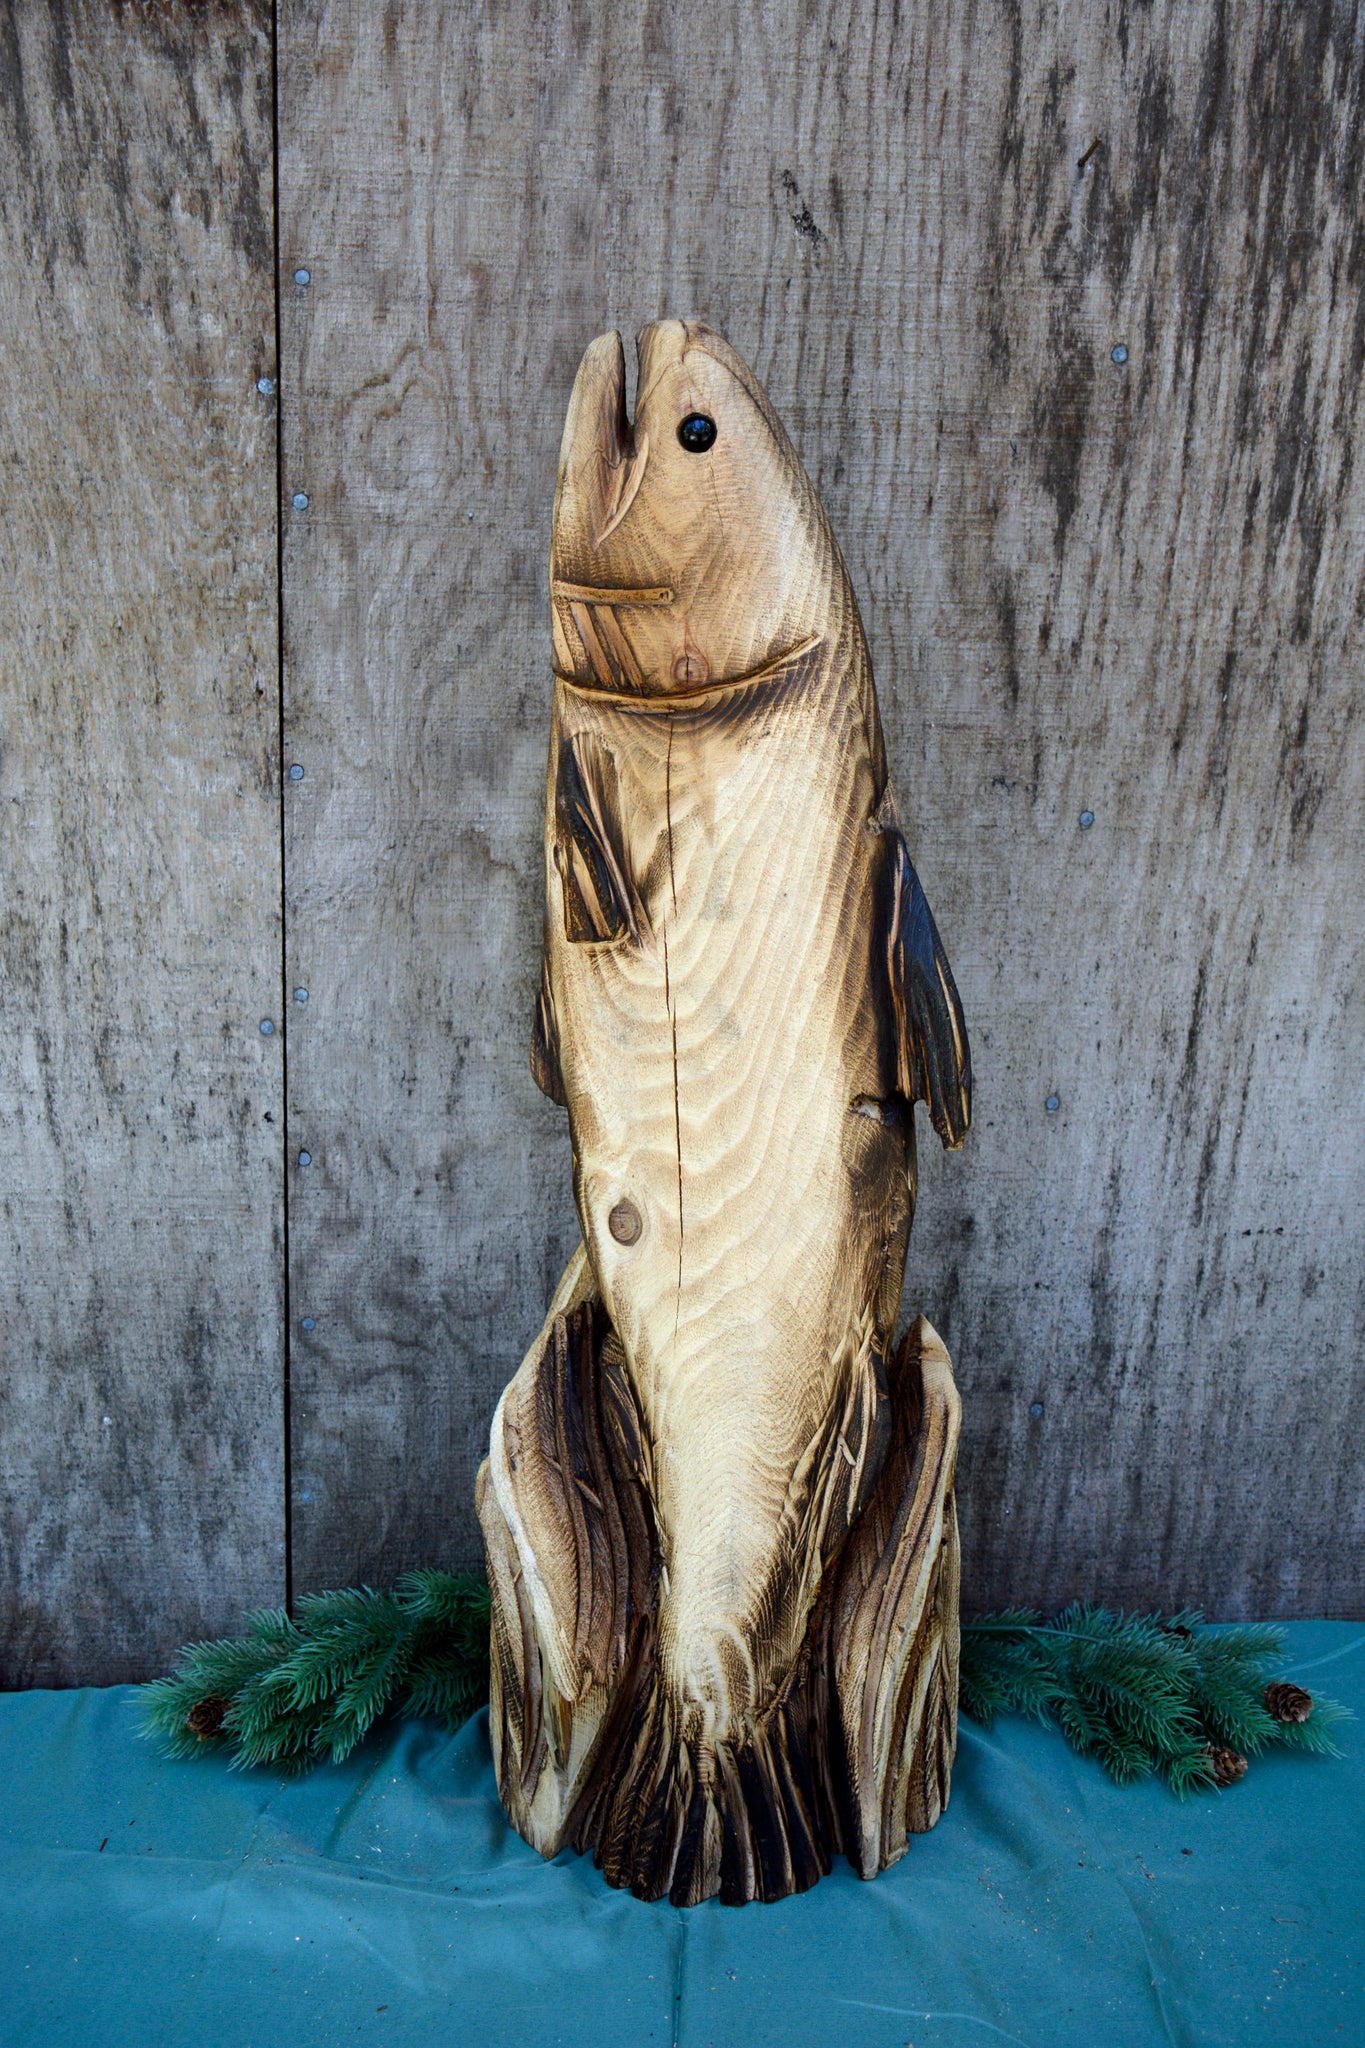 Premium Photo  A carved wooden fish is carved in a wood.